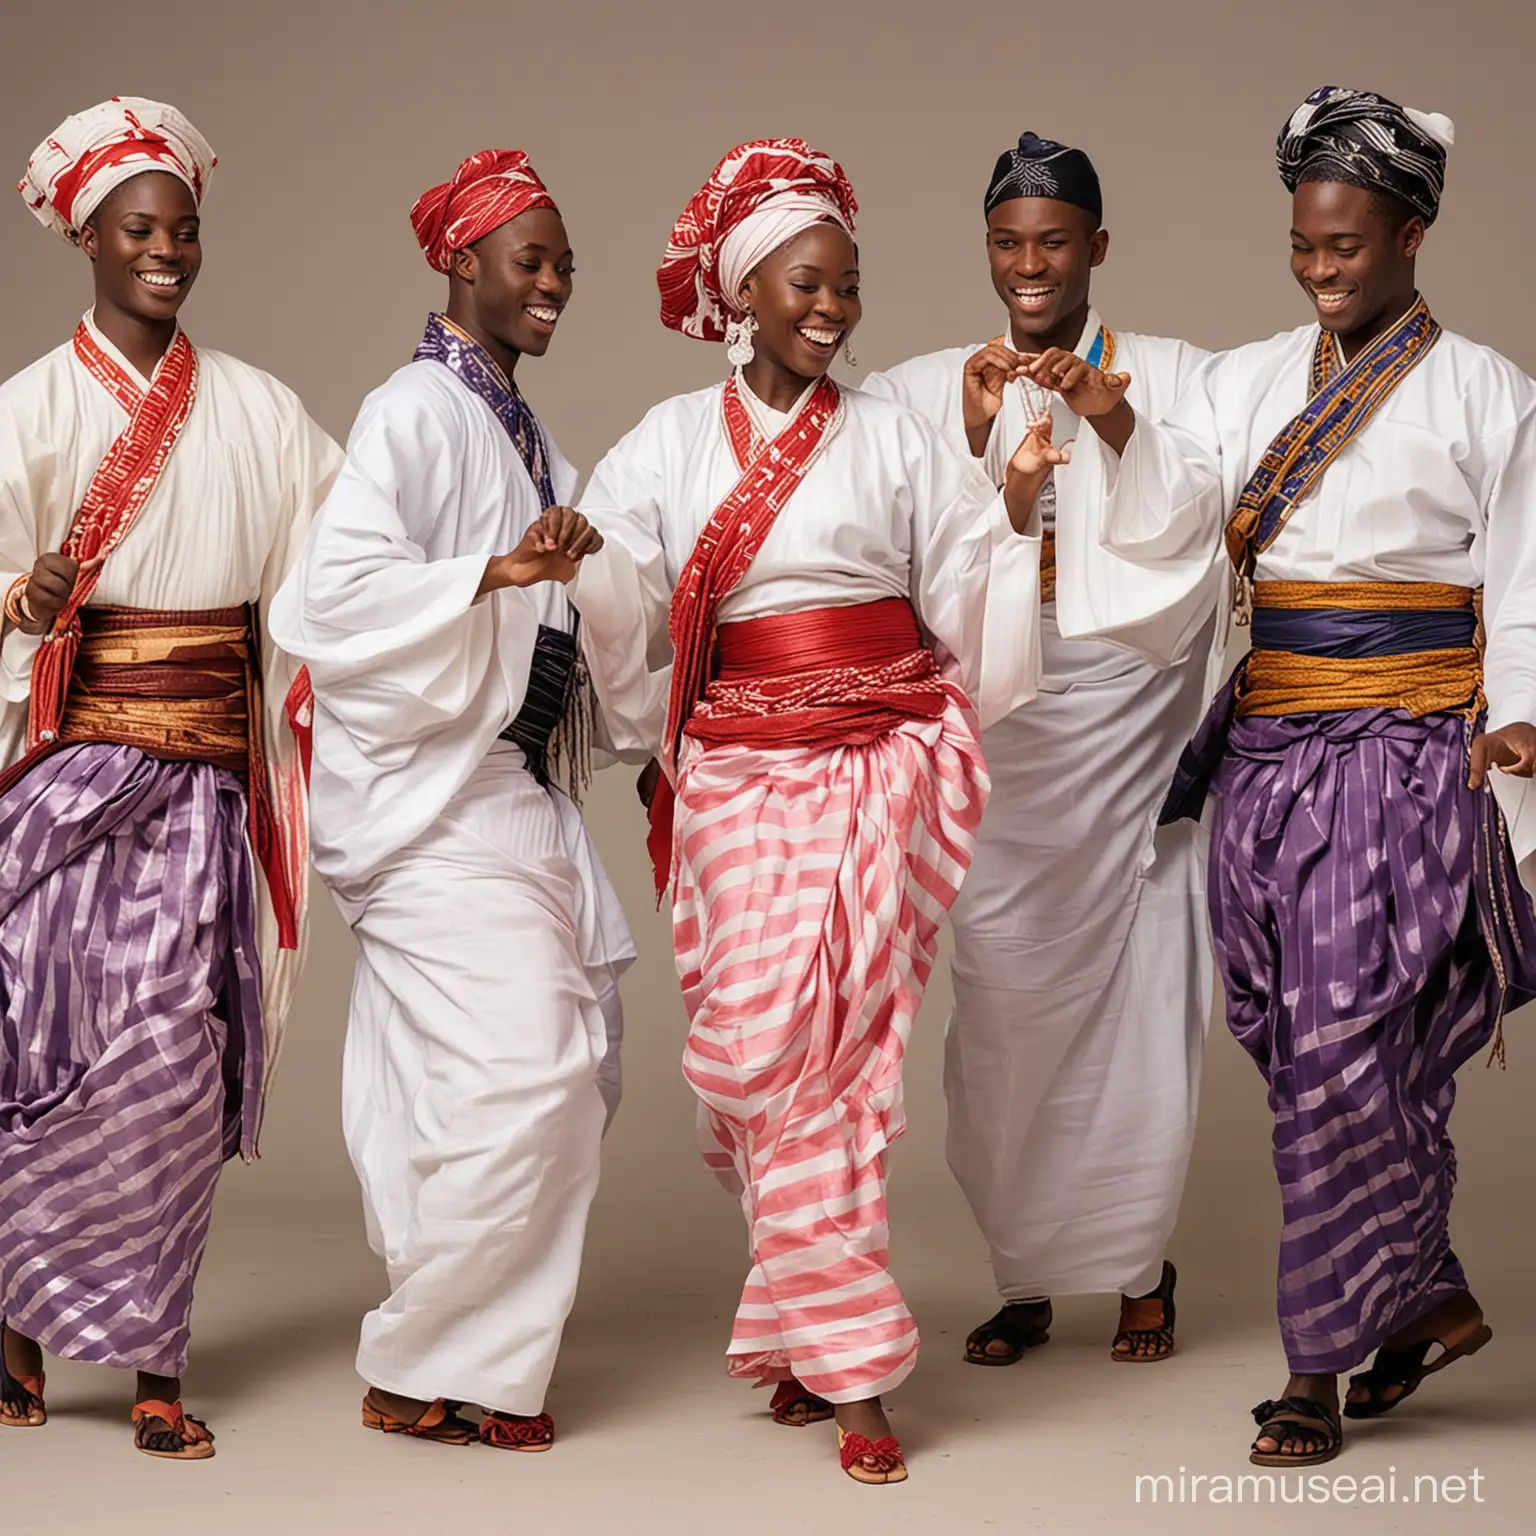 Traditional Aso Oke Dance Vibrant Celebration of Culture and Unity